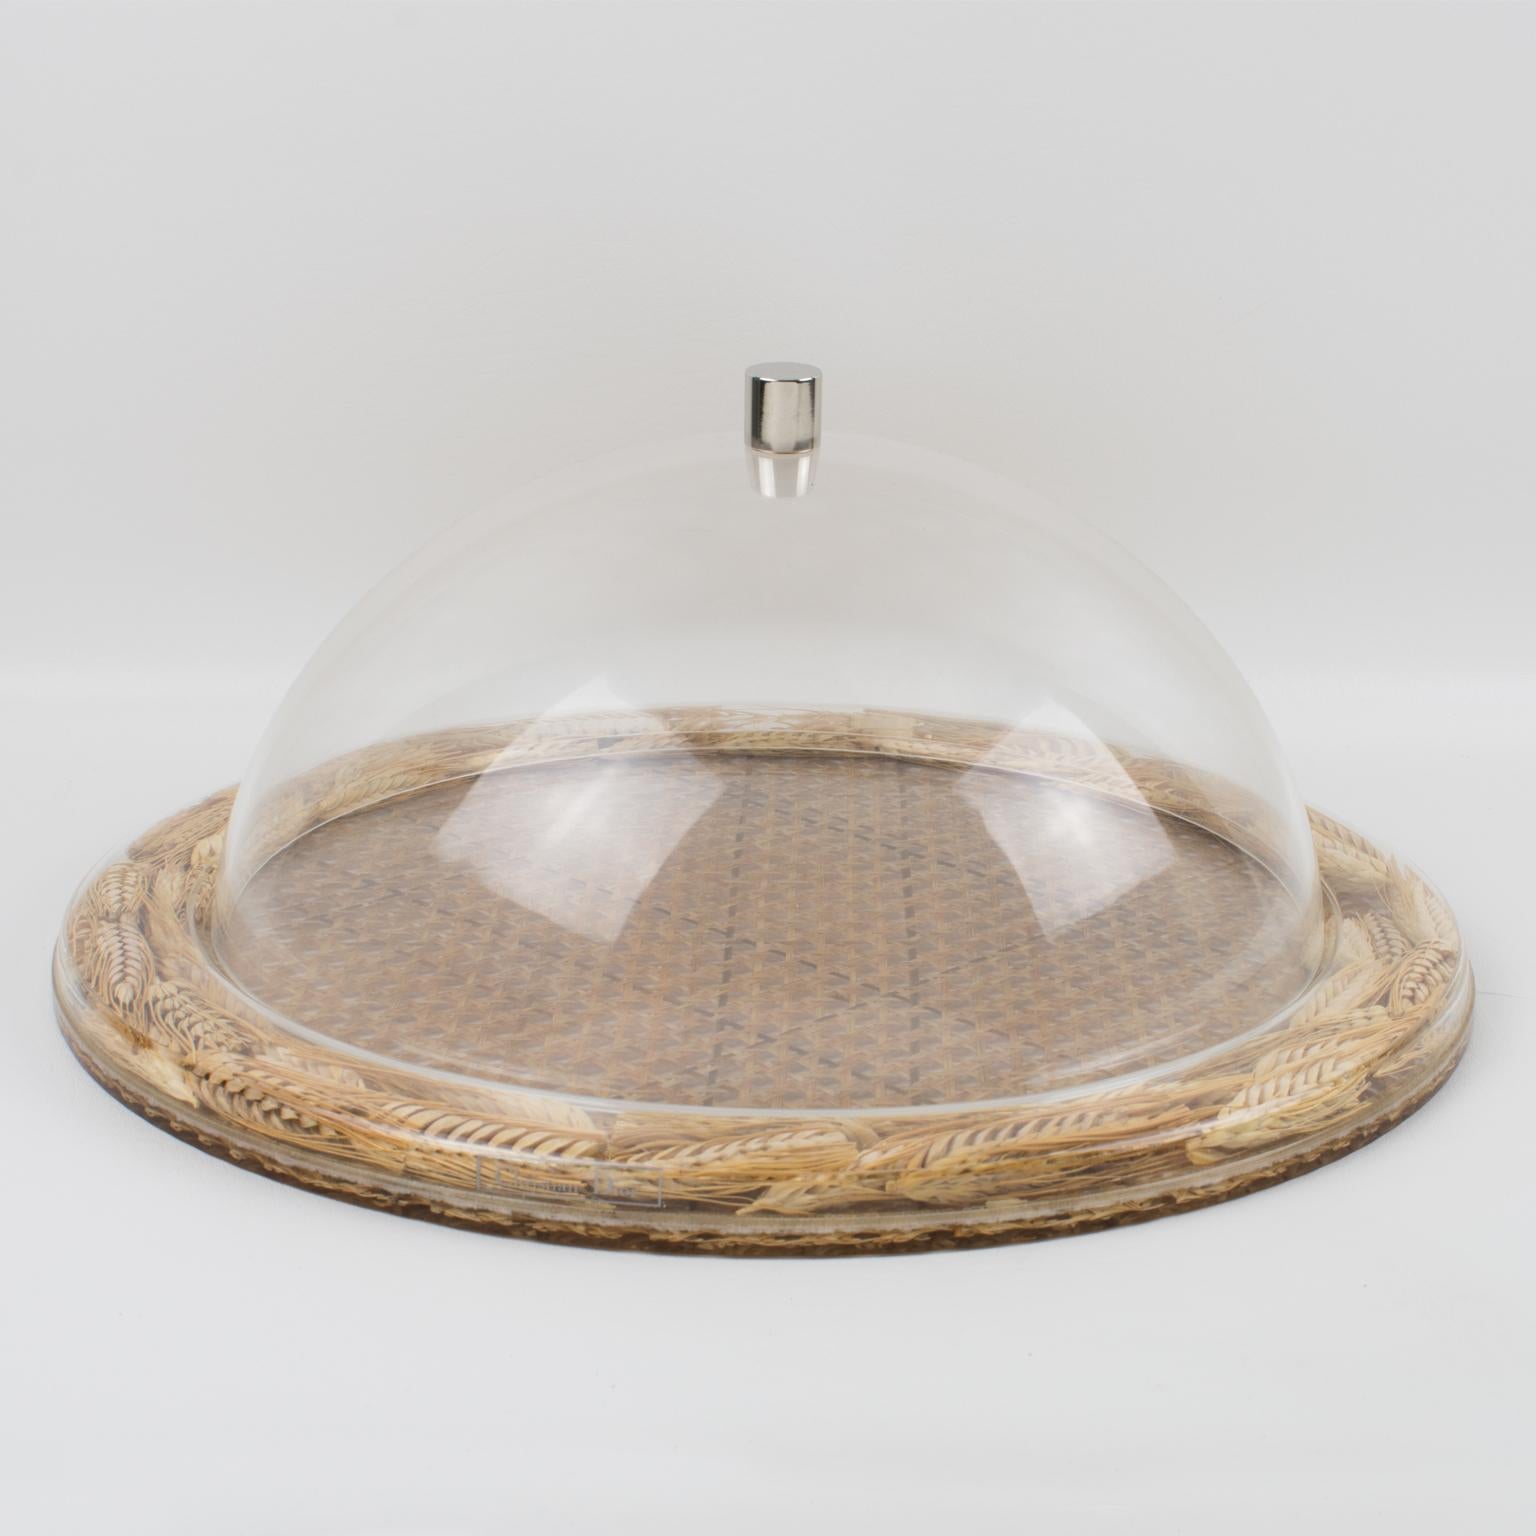 Christian Dior Tray Board Platter Lucite, Rattan and Wheat 5